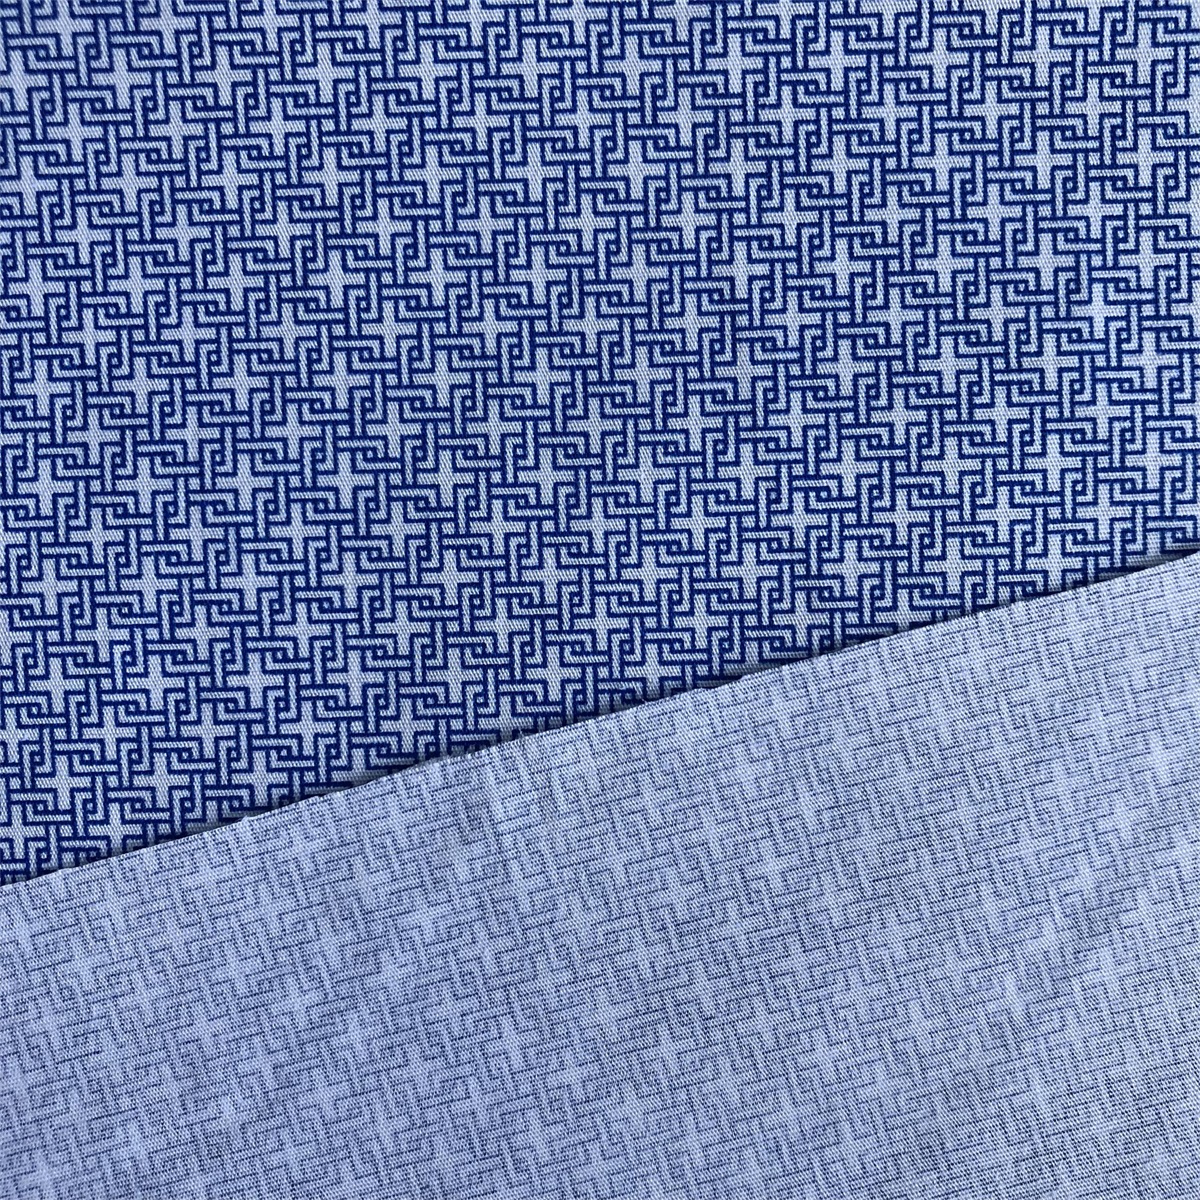 Cotton Spandex Fabric by compact yarn for men's casual shirts 98% cotton 2% spandex elastane stretch poplin printed shirts fabric